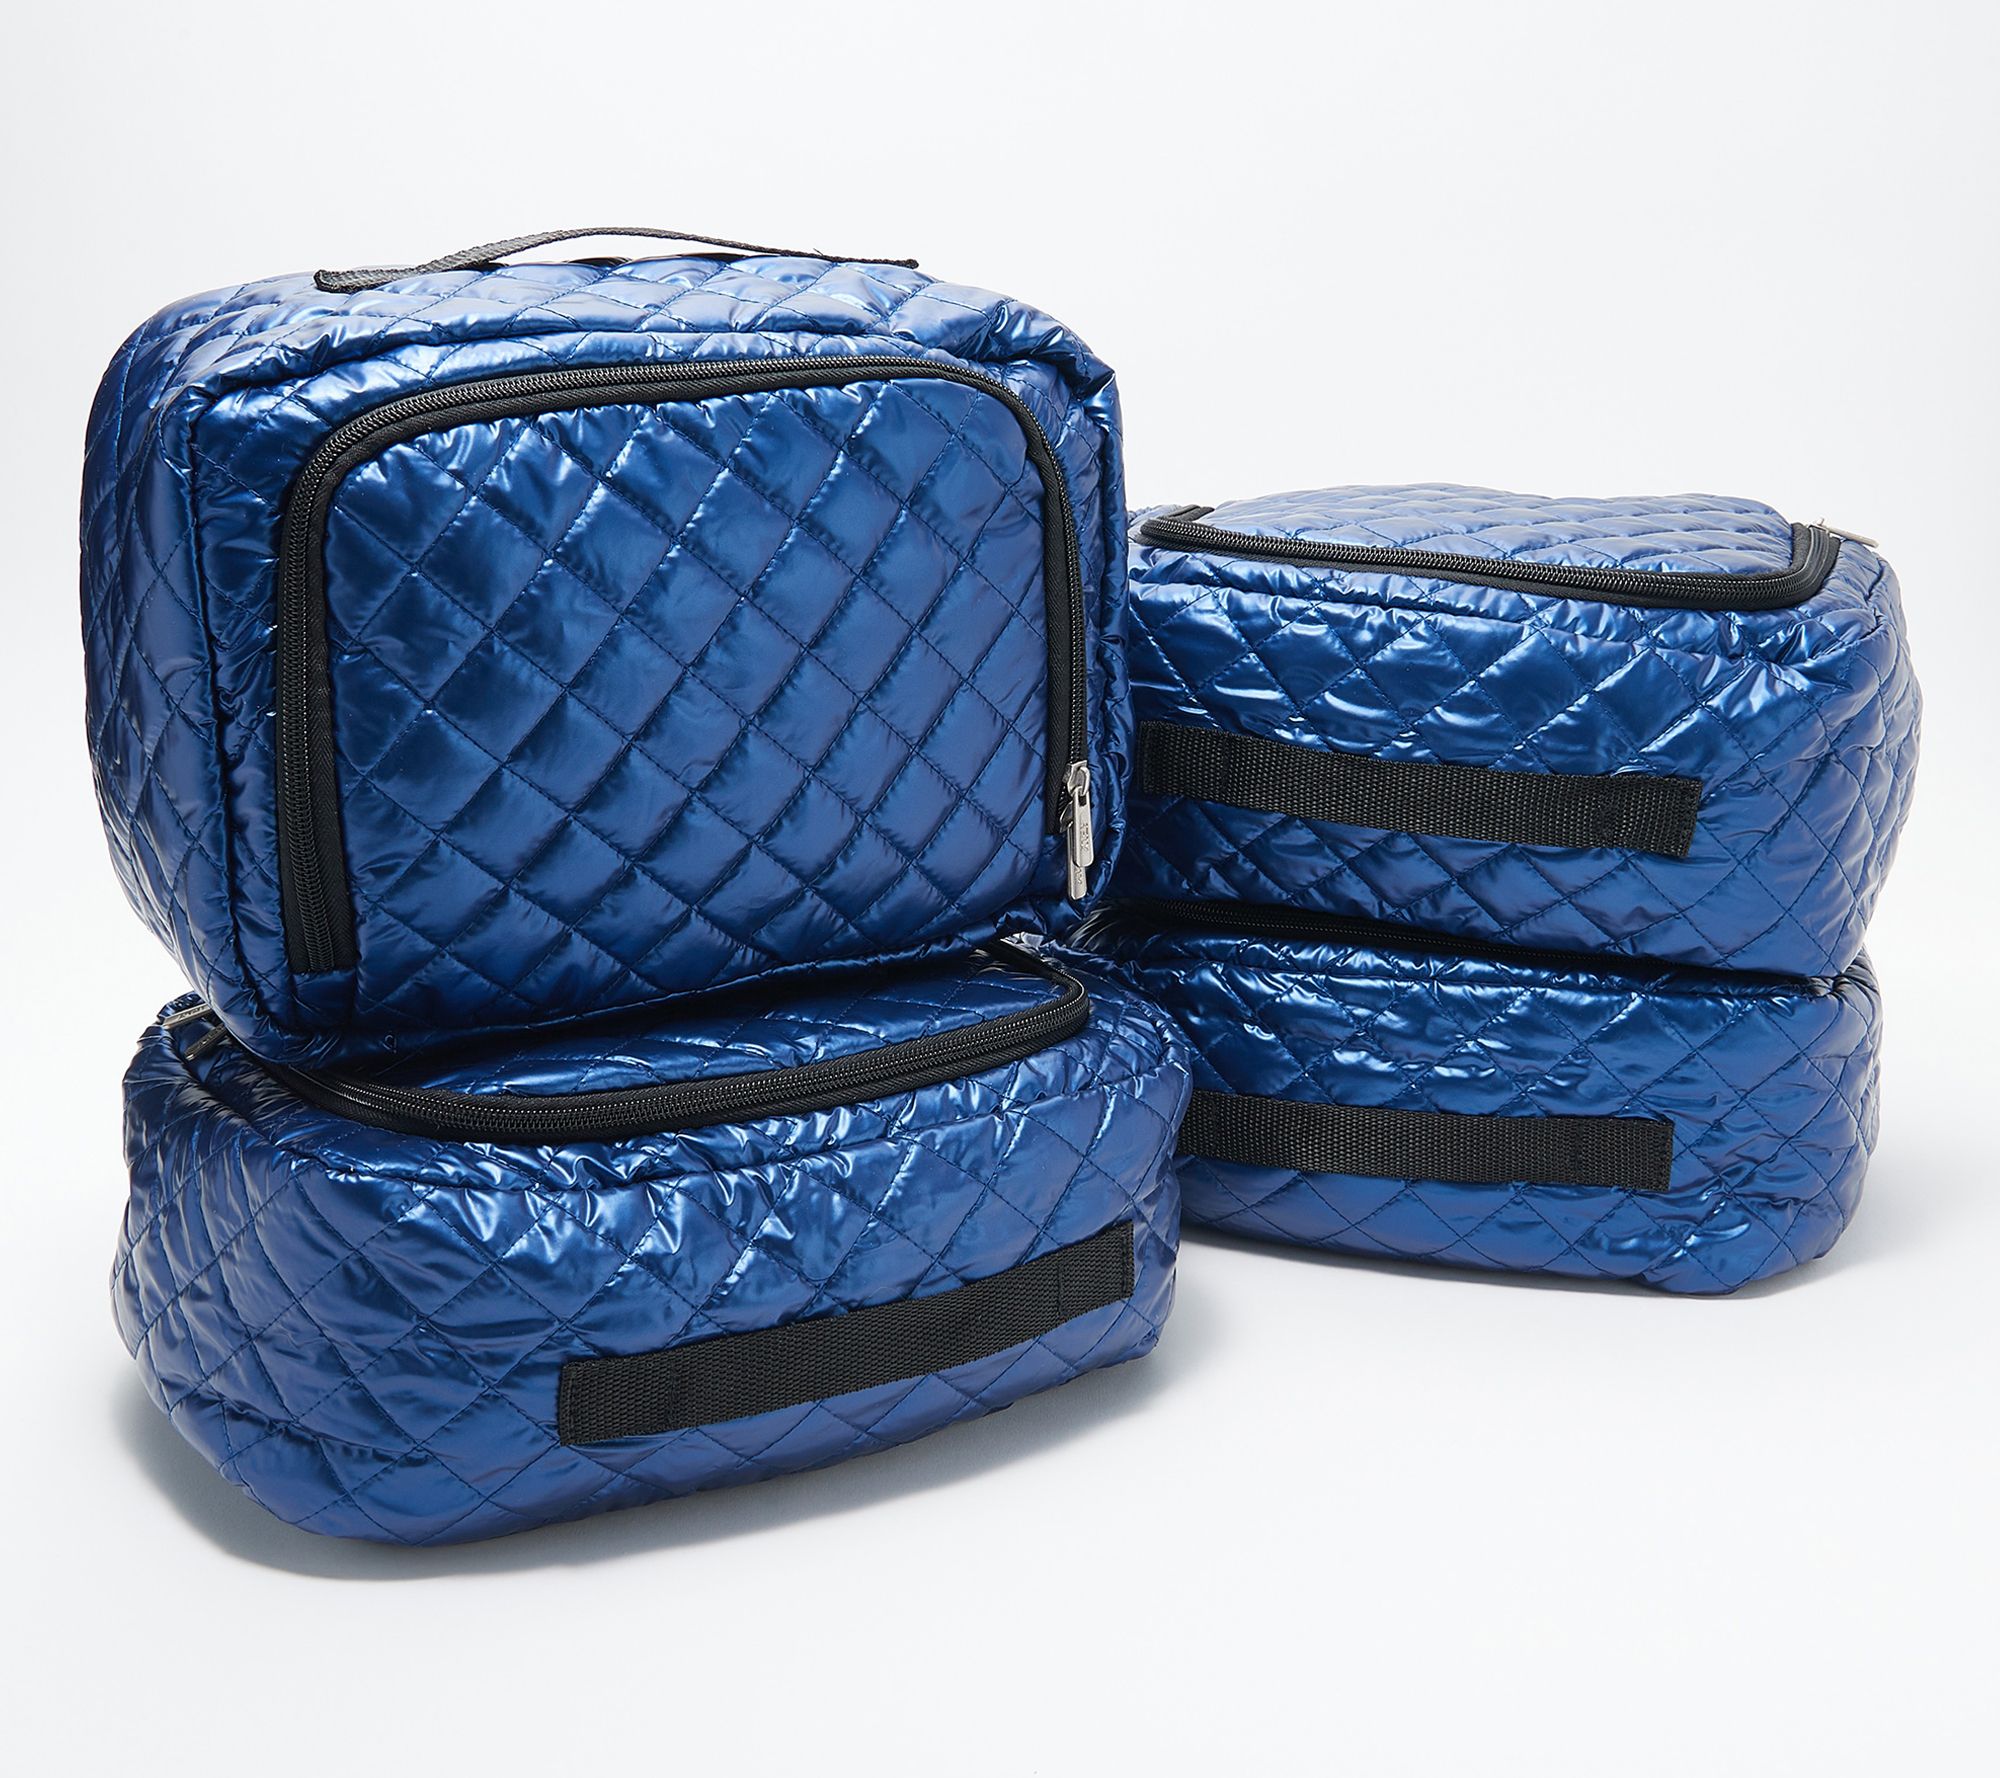 iFLY Set of 4 Quilted Packing Cubes 